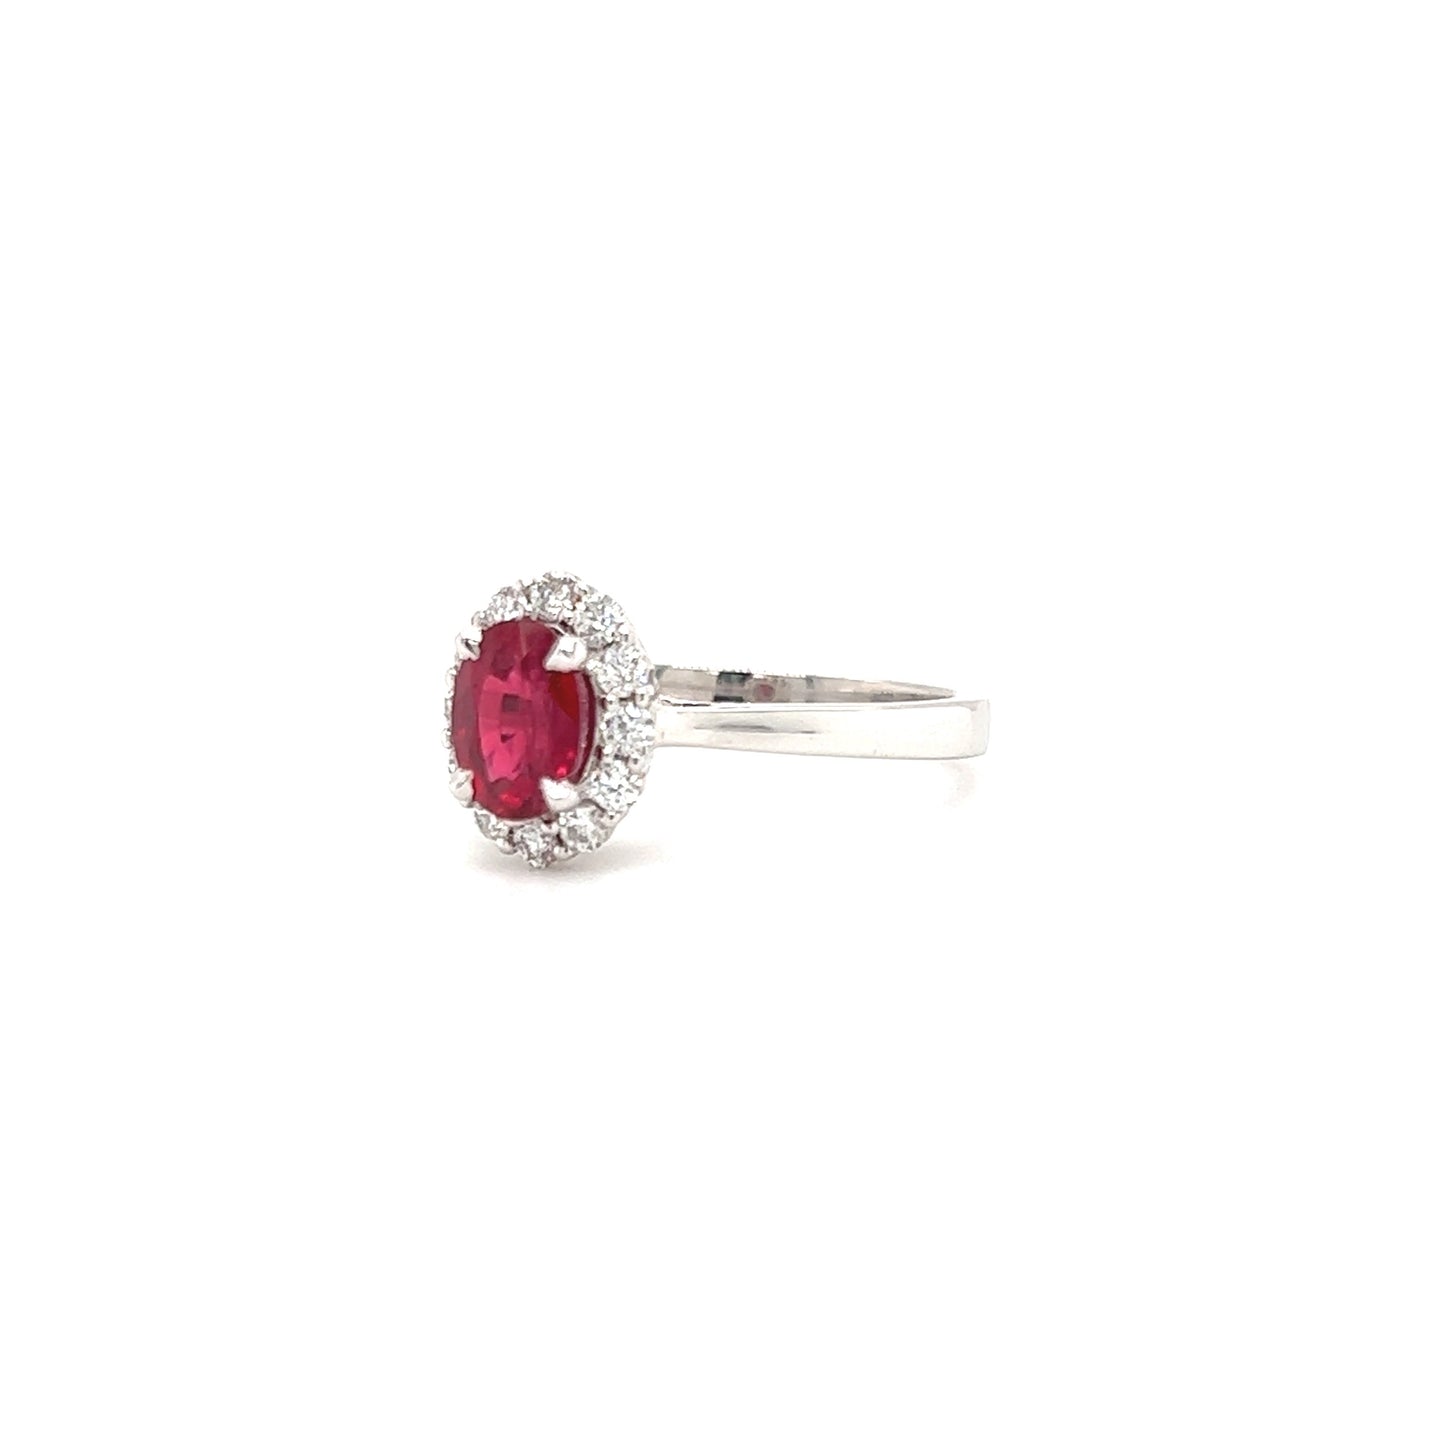 Oval Ruby Ring with Diamond Halo in 14K White Gold Left Side View